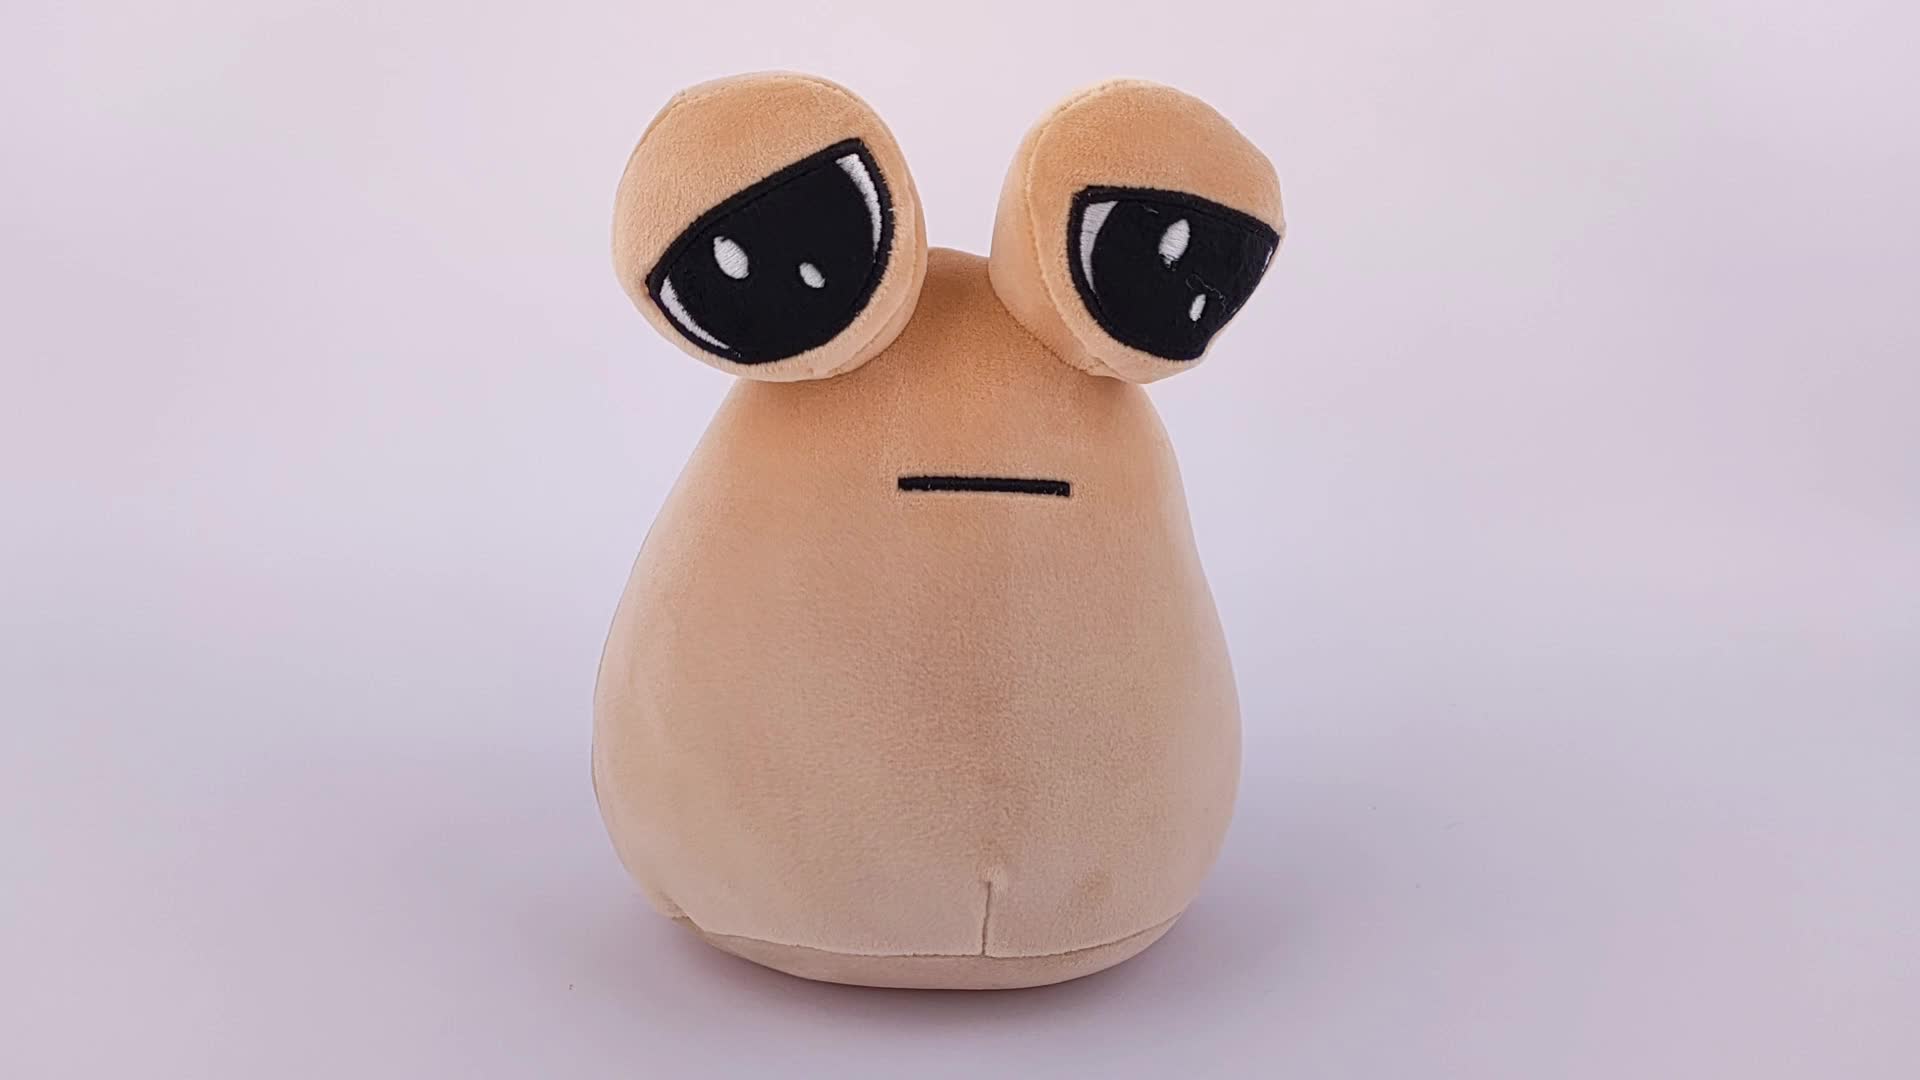 The Tired Alienmy Pet Alien Pou Plush Toy - Collectible Game Character  Pillow